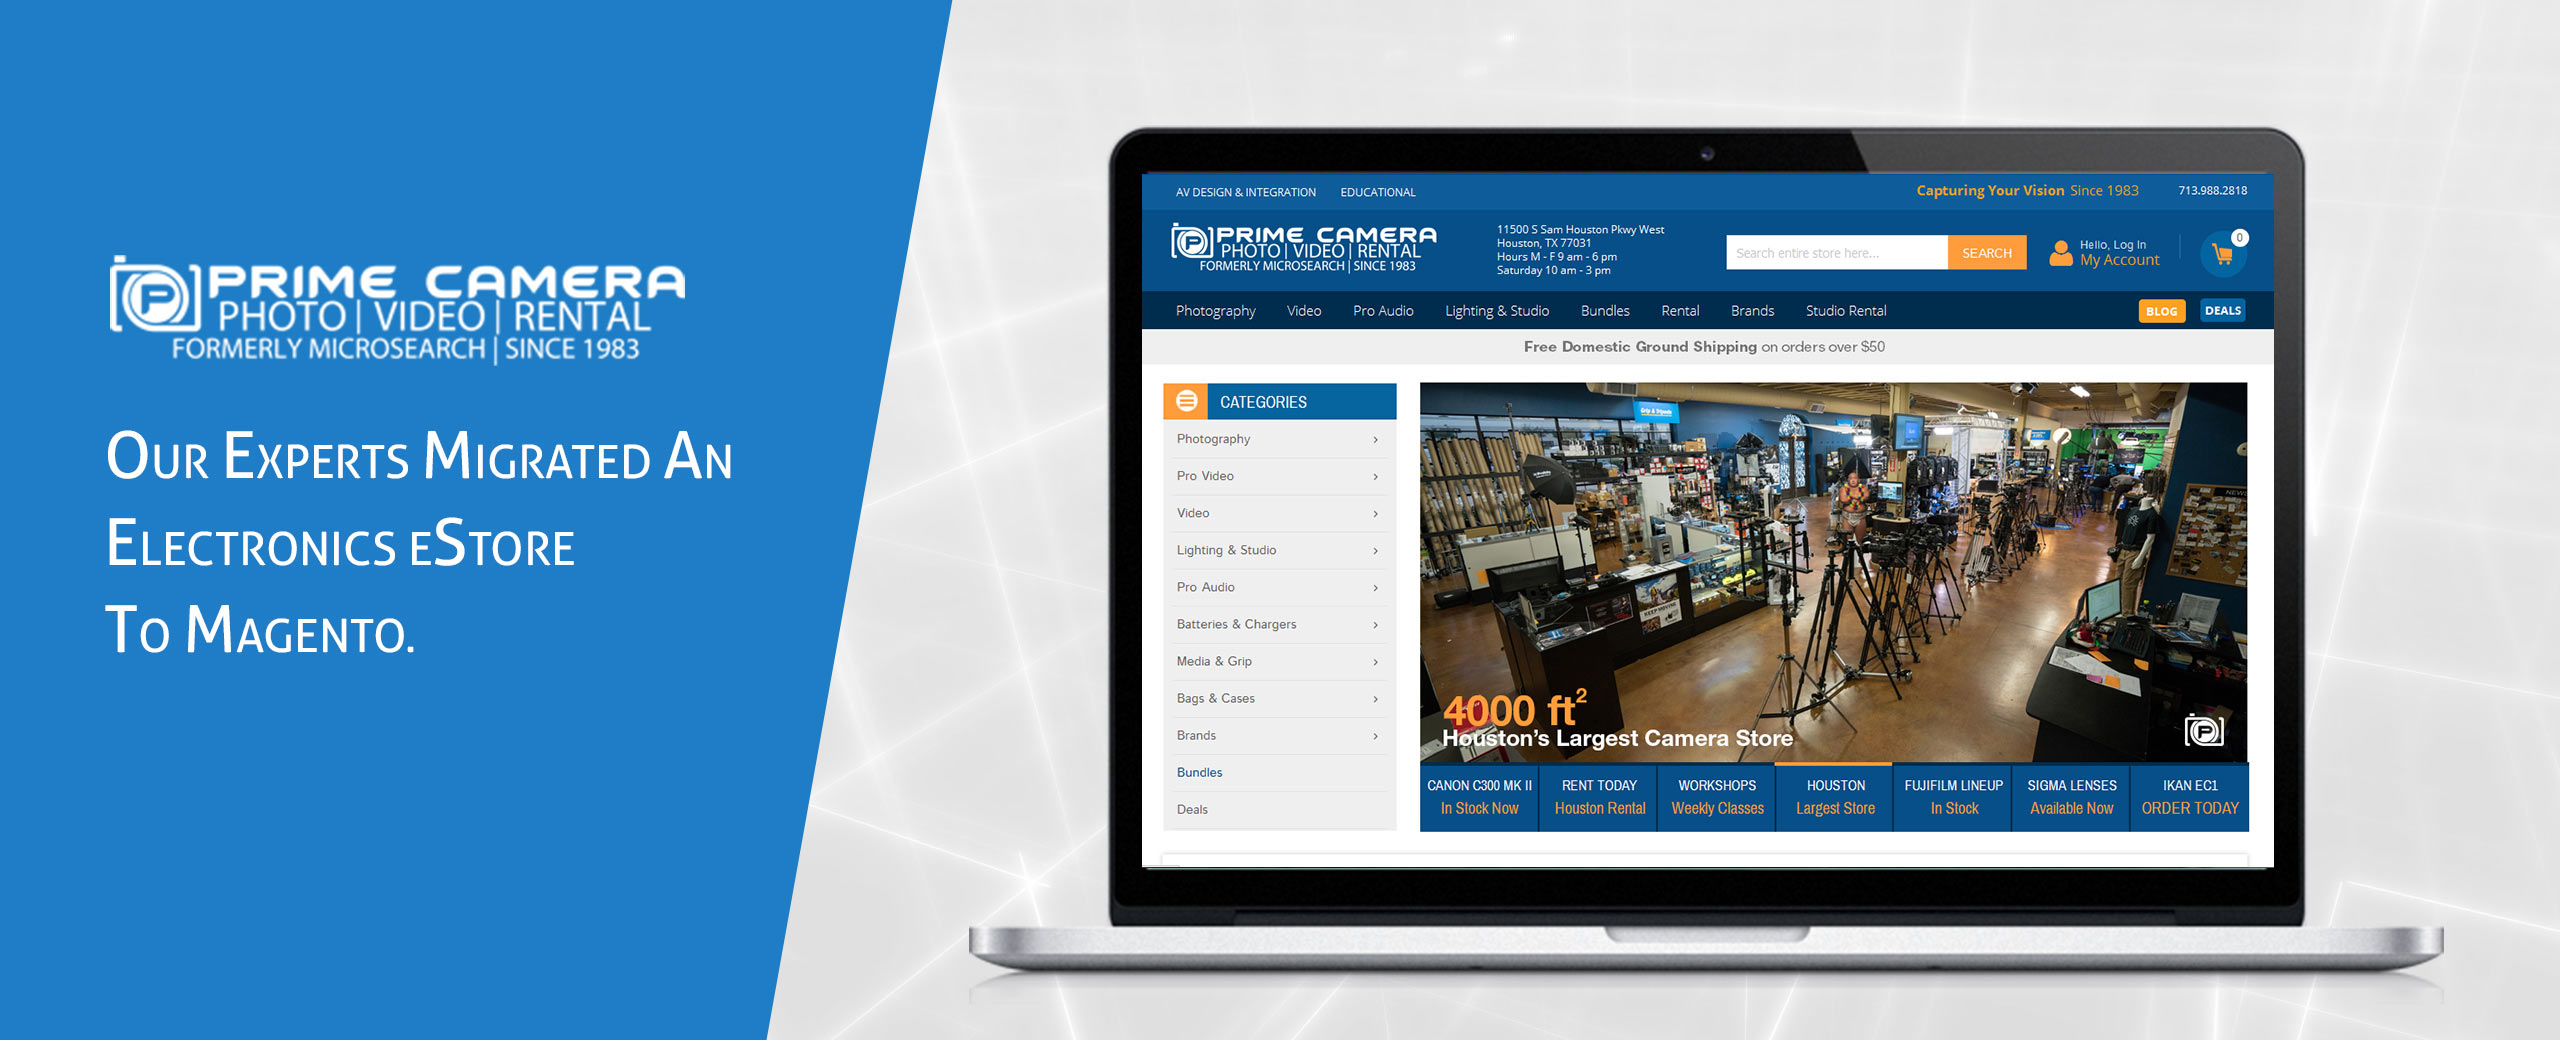 Our Experts Migrated an electronics eStore to Magento.